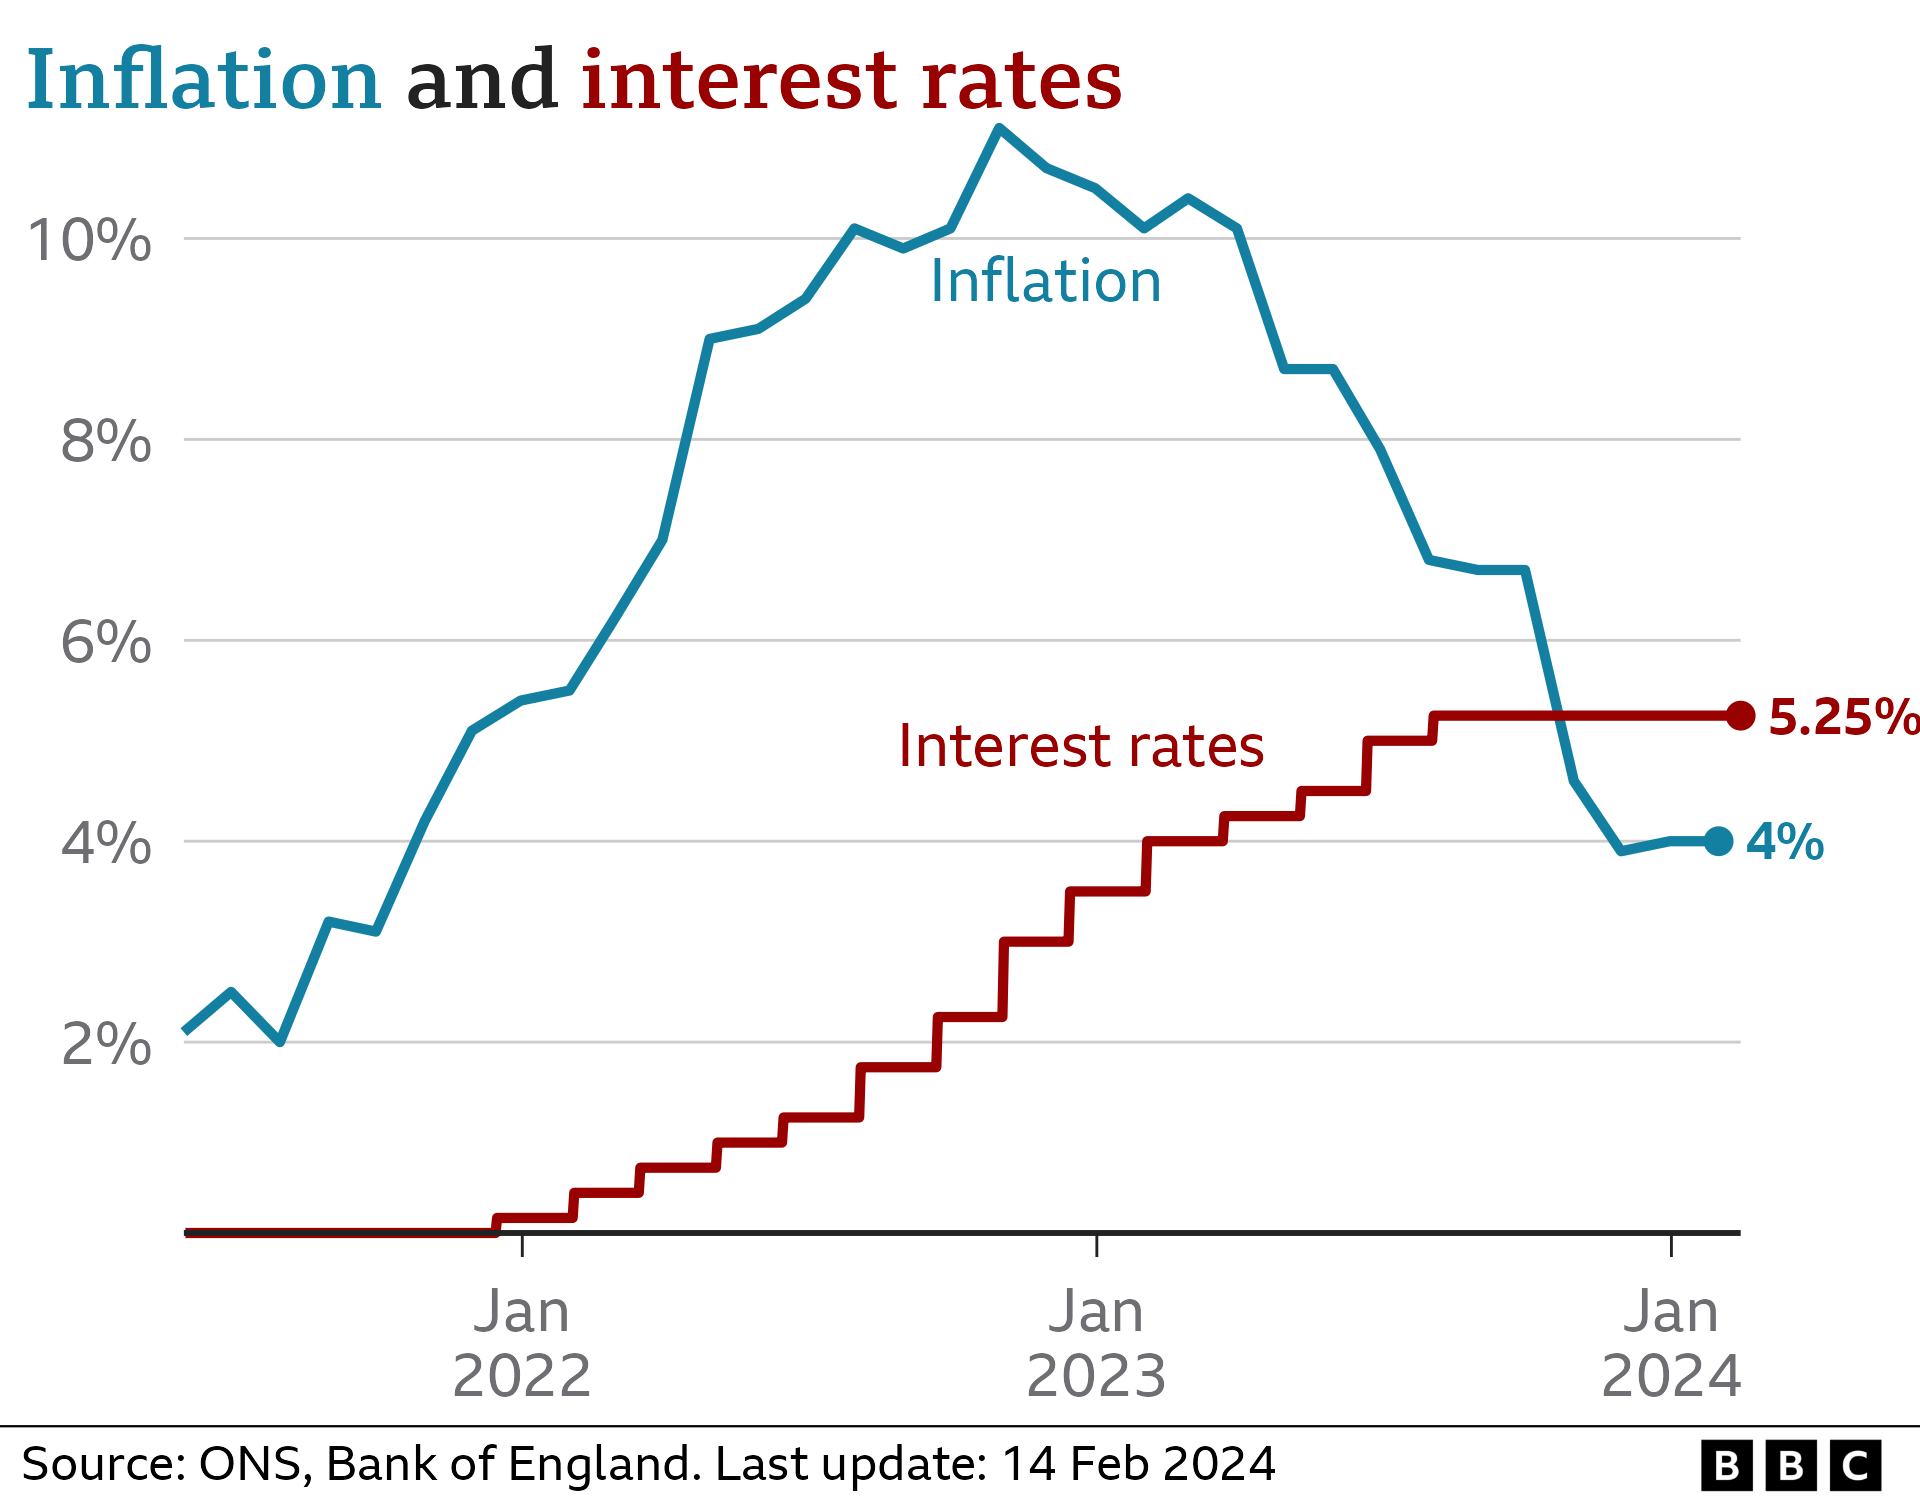 Graphic showing UK inflation and interest rates. The most recent data from February 2024 shows inflation at 4.0% and interest rates at 5.25%.